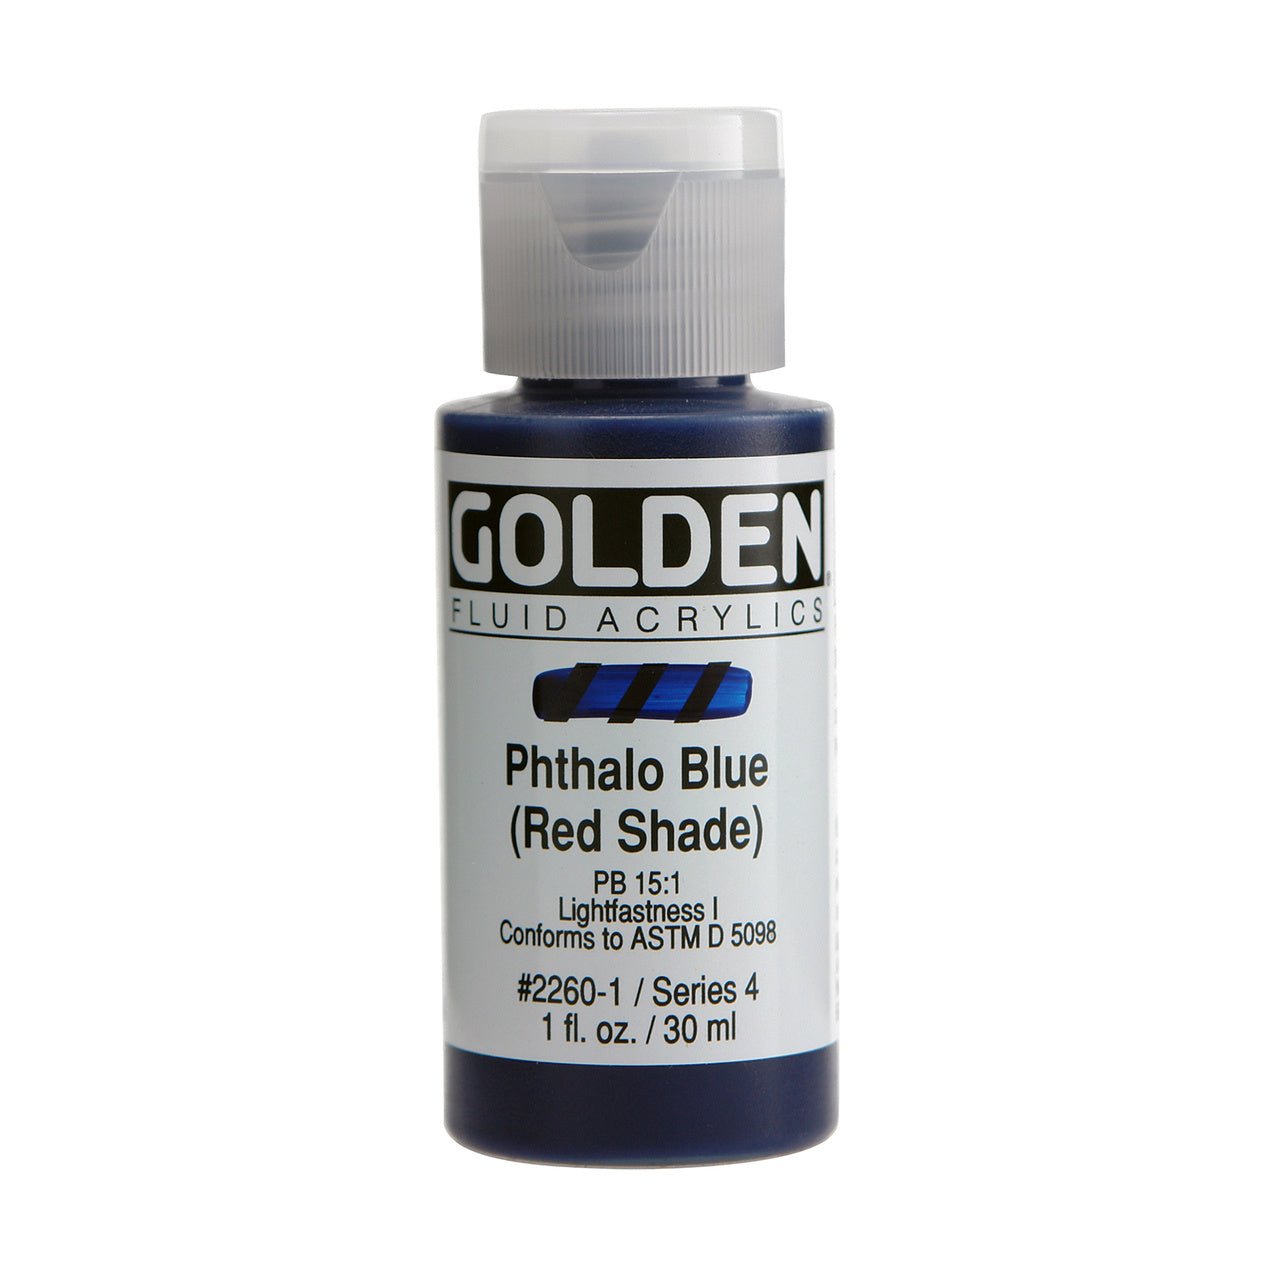 Golden Fluid Acrylic Phthalo Blue (red shade) 1 oz - merriartist.com